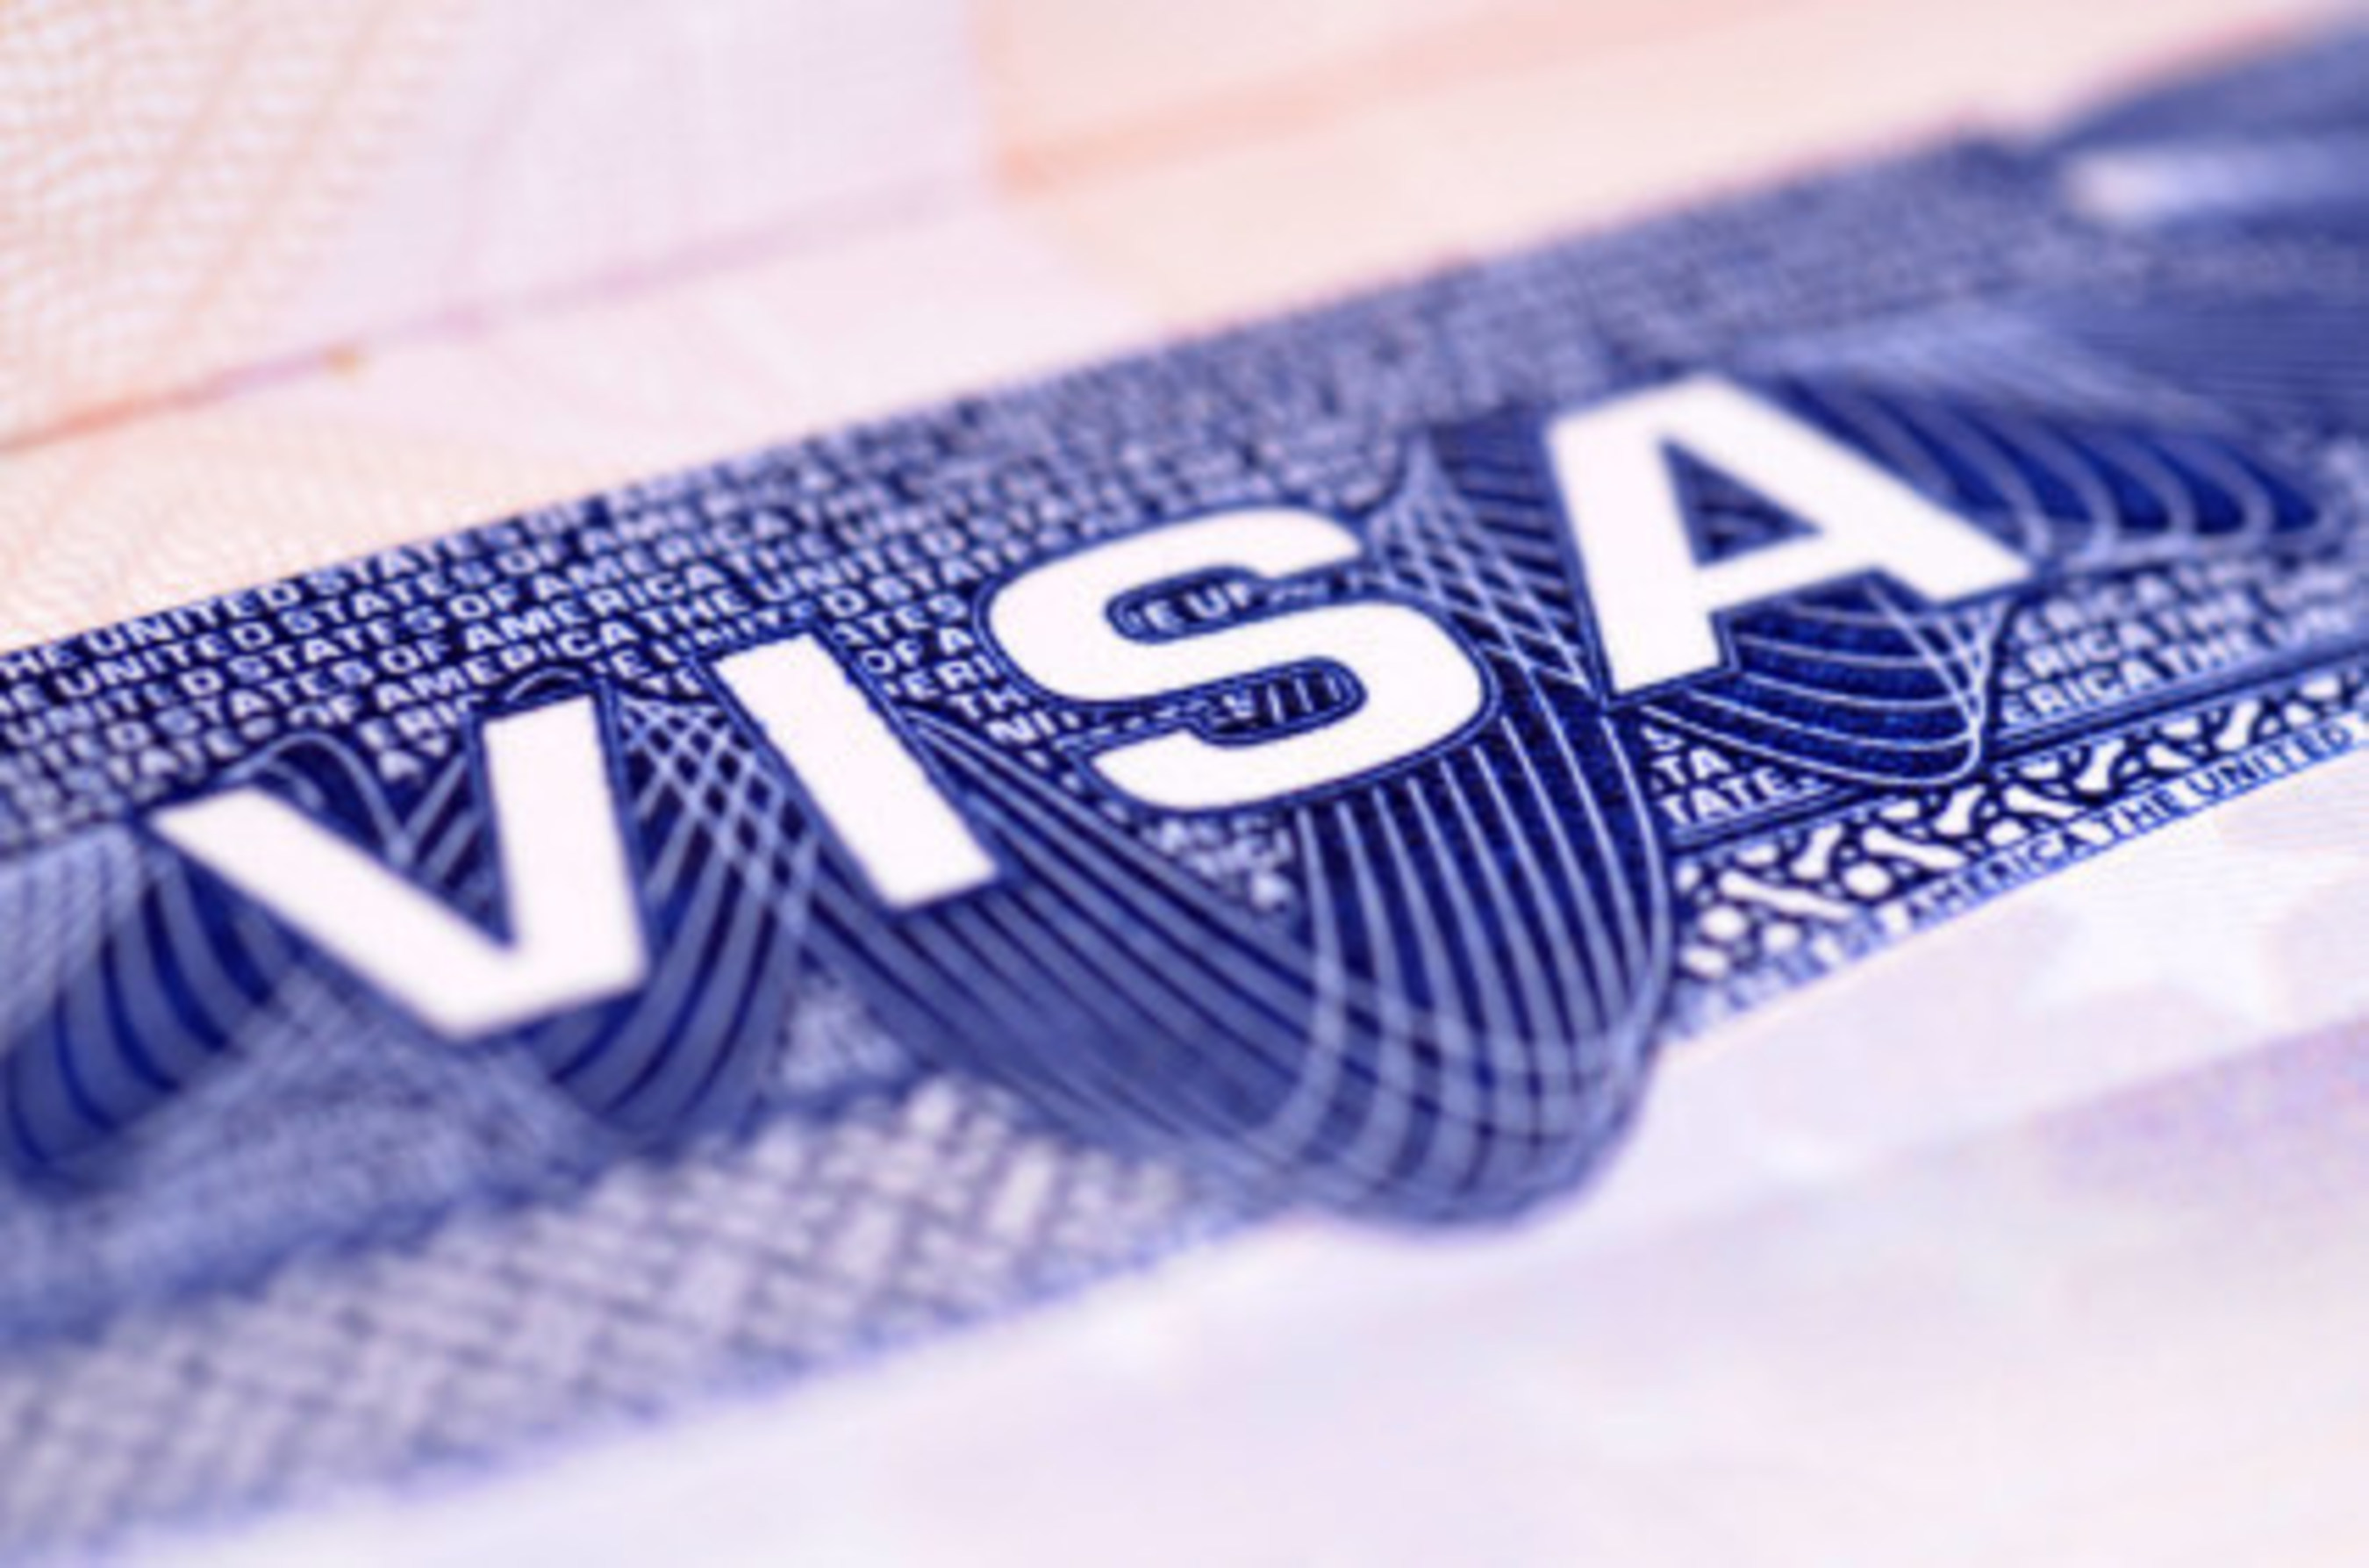 Provisional Waivers for immigration overstays